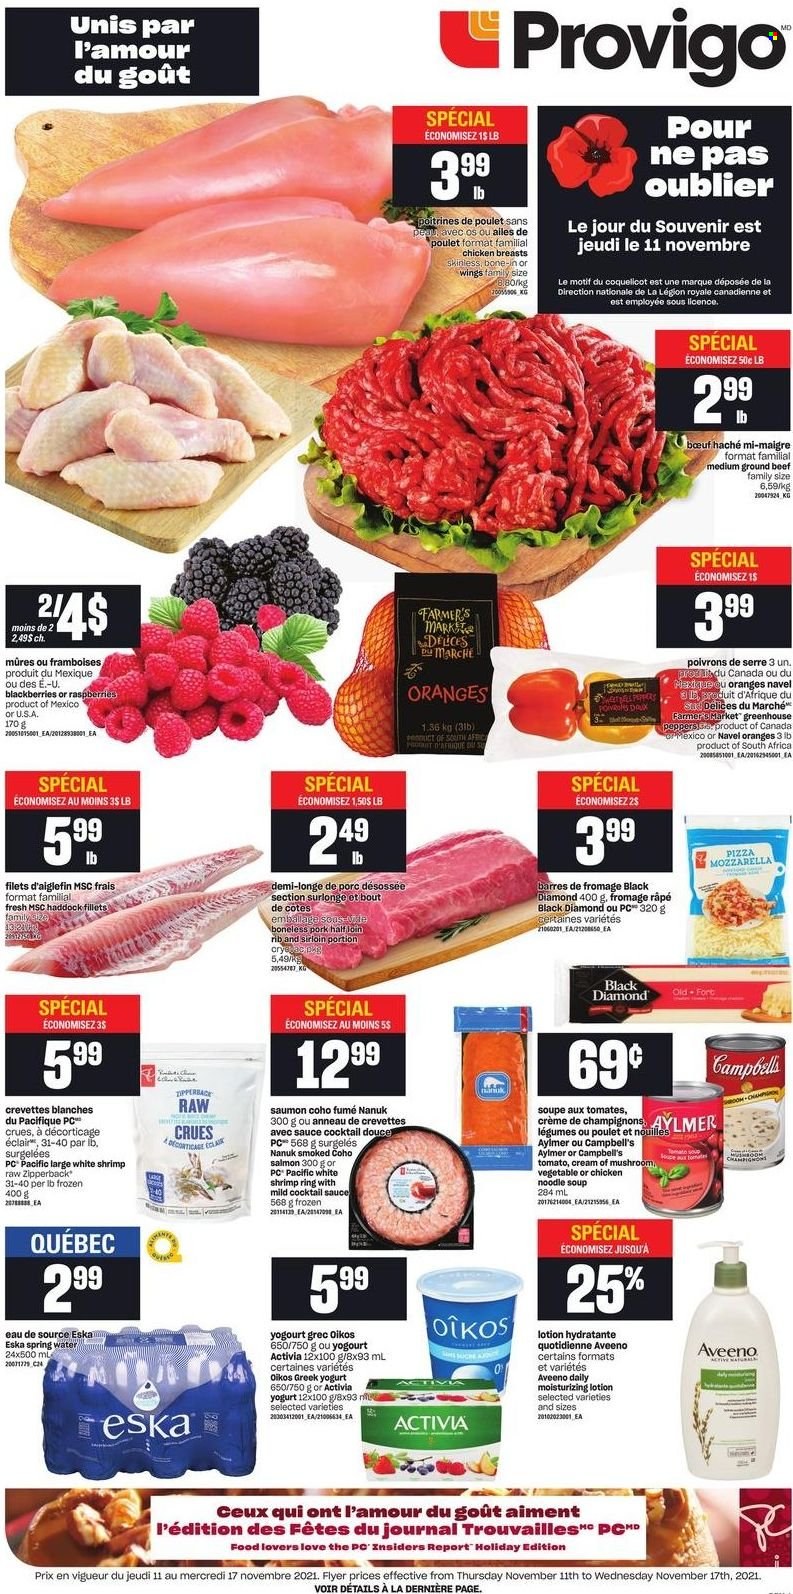 thumbnail - Provigo Flyer - November 11, 2021 - November 17, 2021 - Sales products - blackberries, navel oranges, salmon, haddock, shrimps, Campbell's, pizza, soup, sauce, noodles cup, noodles, greek yoghurt, yoghurt, Activia, Oikos, cocktail sauce, spring water, chicken breasts, beef meat, ground beef, Aveeno, body lotion, oranges. Page 1.